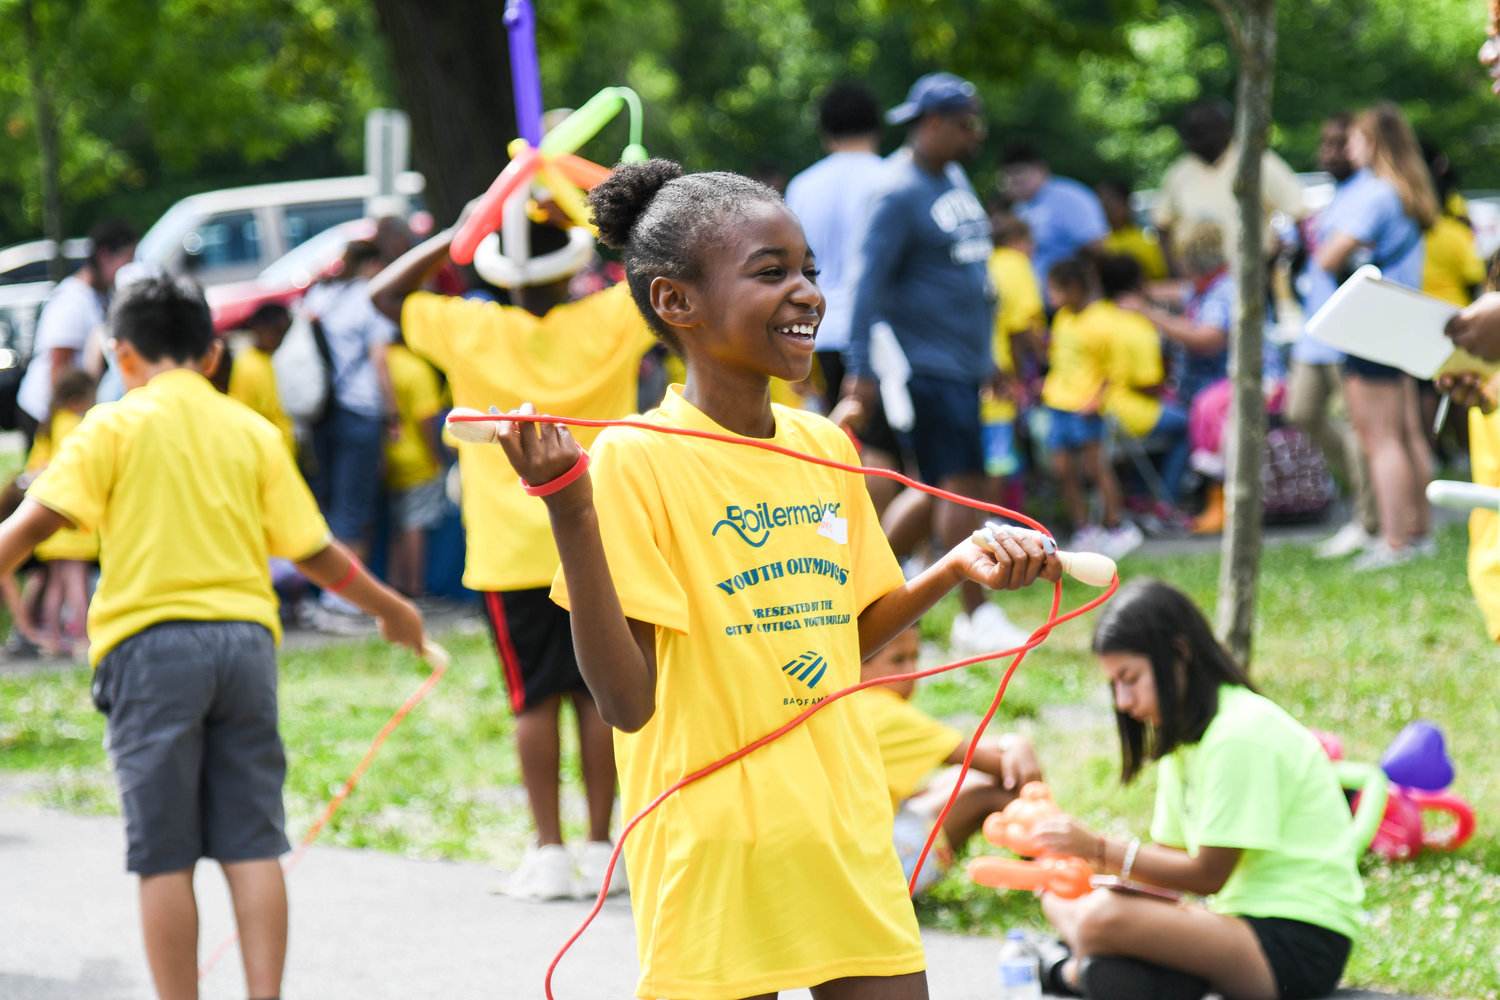 Renee Greene jumps rope during the Boilermaker Youth Olympics on Thursday at T.R. Proctor Park in Utica. The event is for children ages 6-13 from the city of Utica. The event was free and each child received a T-shirt. The first year of the event 300 children participated. The event has grown to 500 participants. Employees from Bank of America and the city of Utica help the children with the events, which include basketball, baseball, jump rope, kickball, disc golf, hockey shootout and balloon toss as well as checkers and Connect Four.